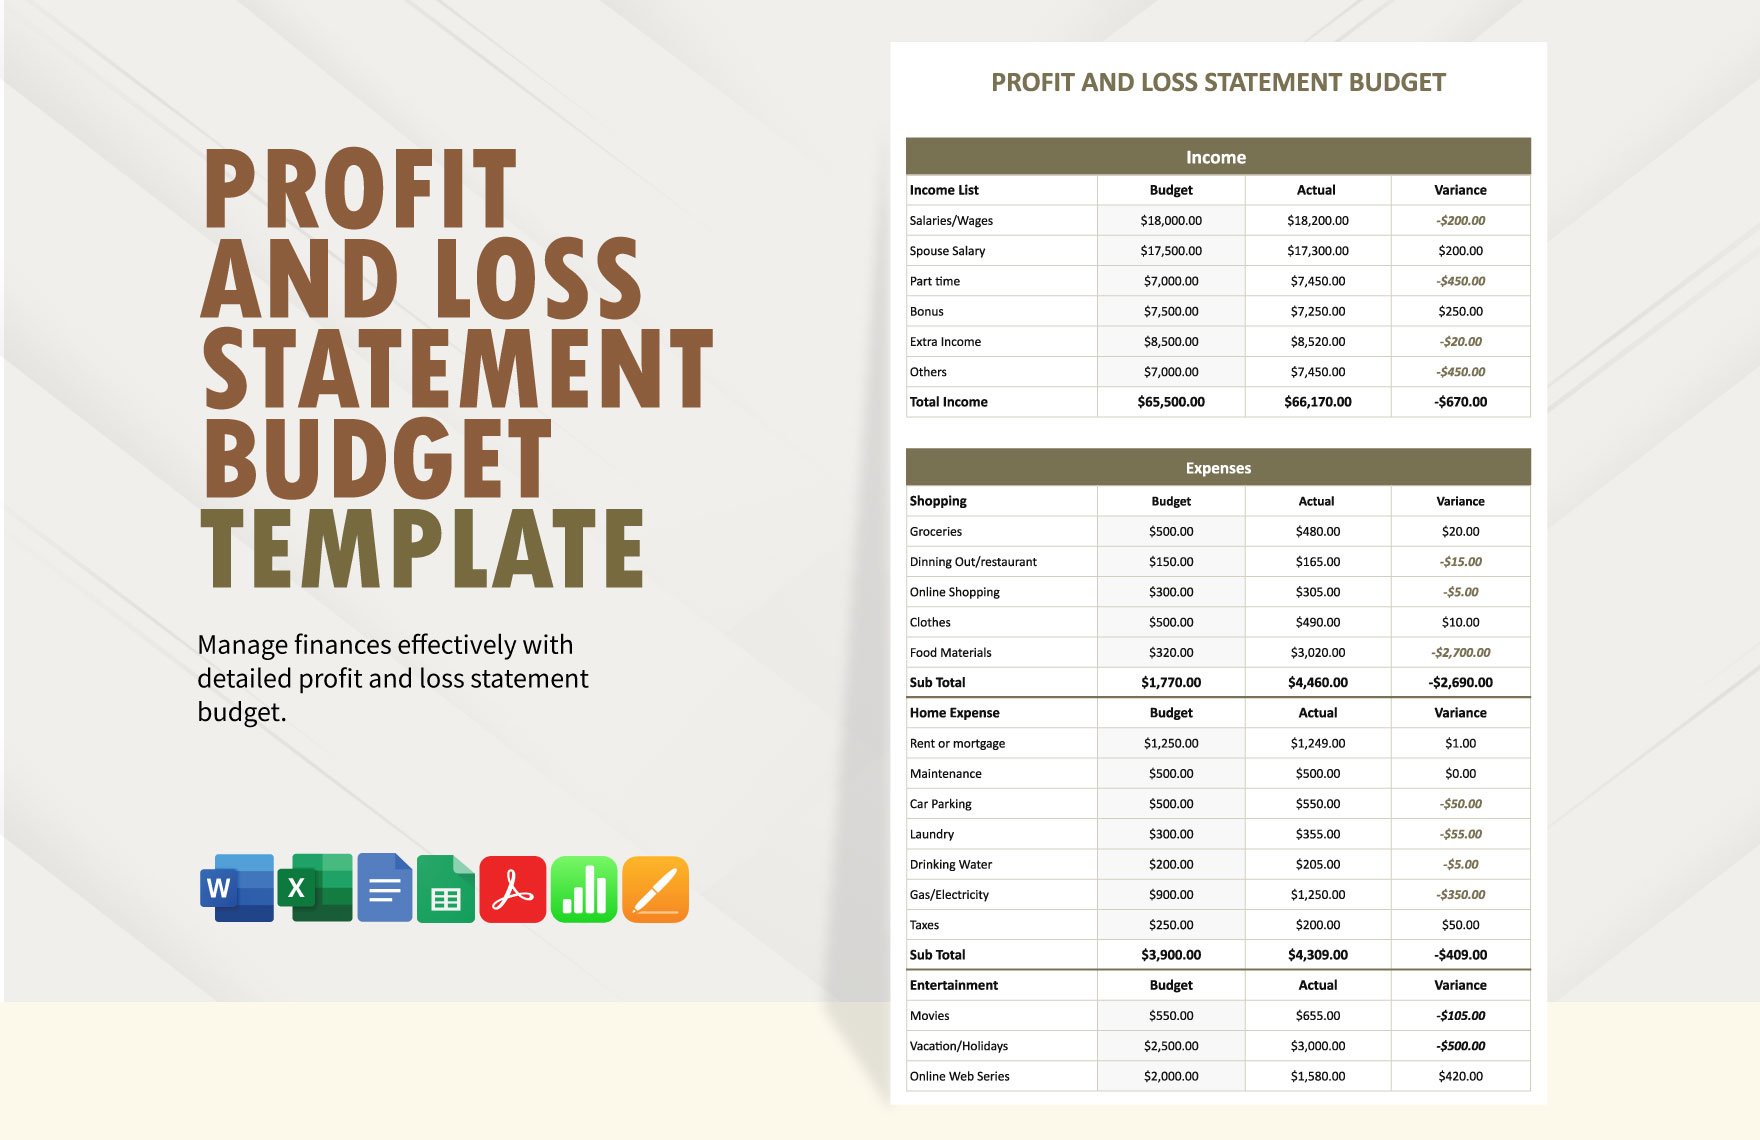 Profit and Loss Statement Budget Template in Word, Google Docs, Excel, PDF, Google Sheets, Apple Pages, Apple Numbers